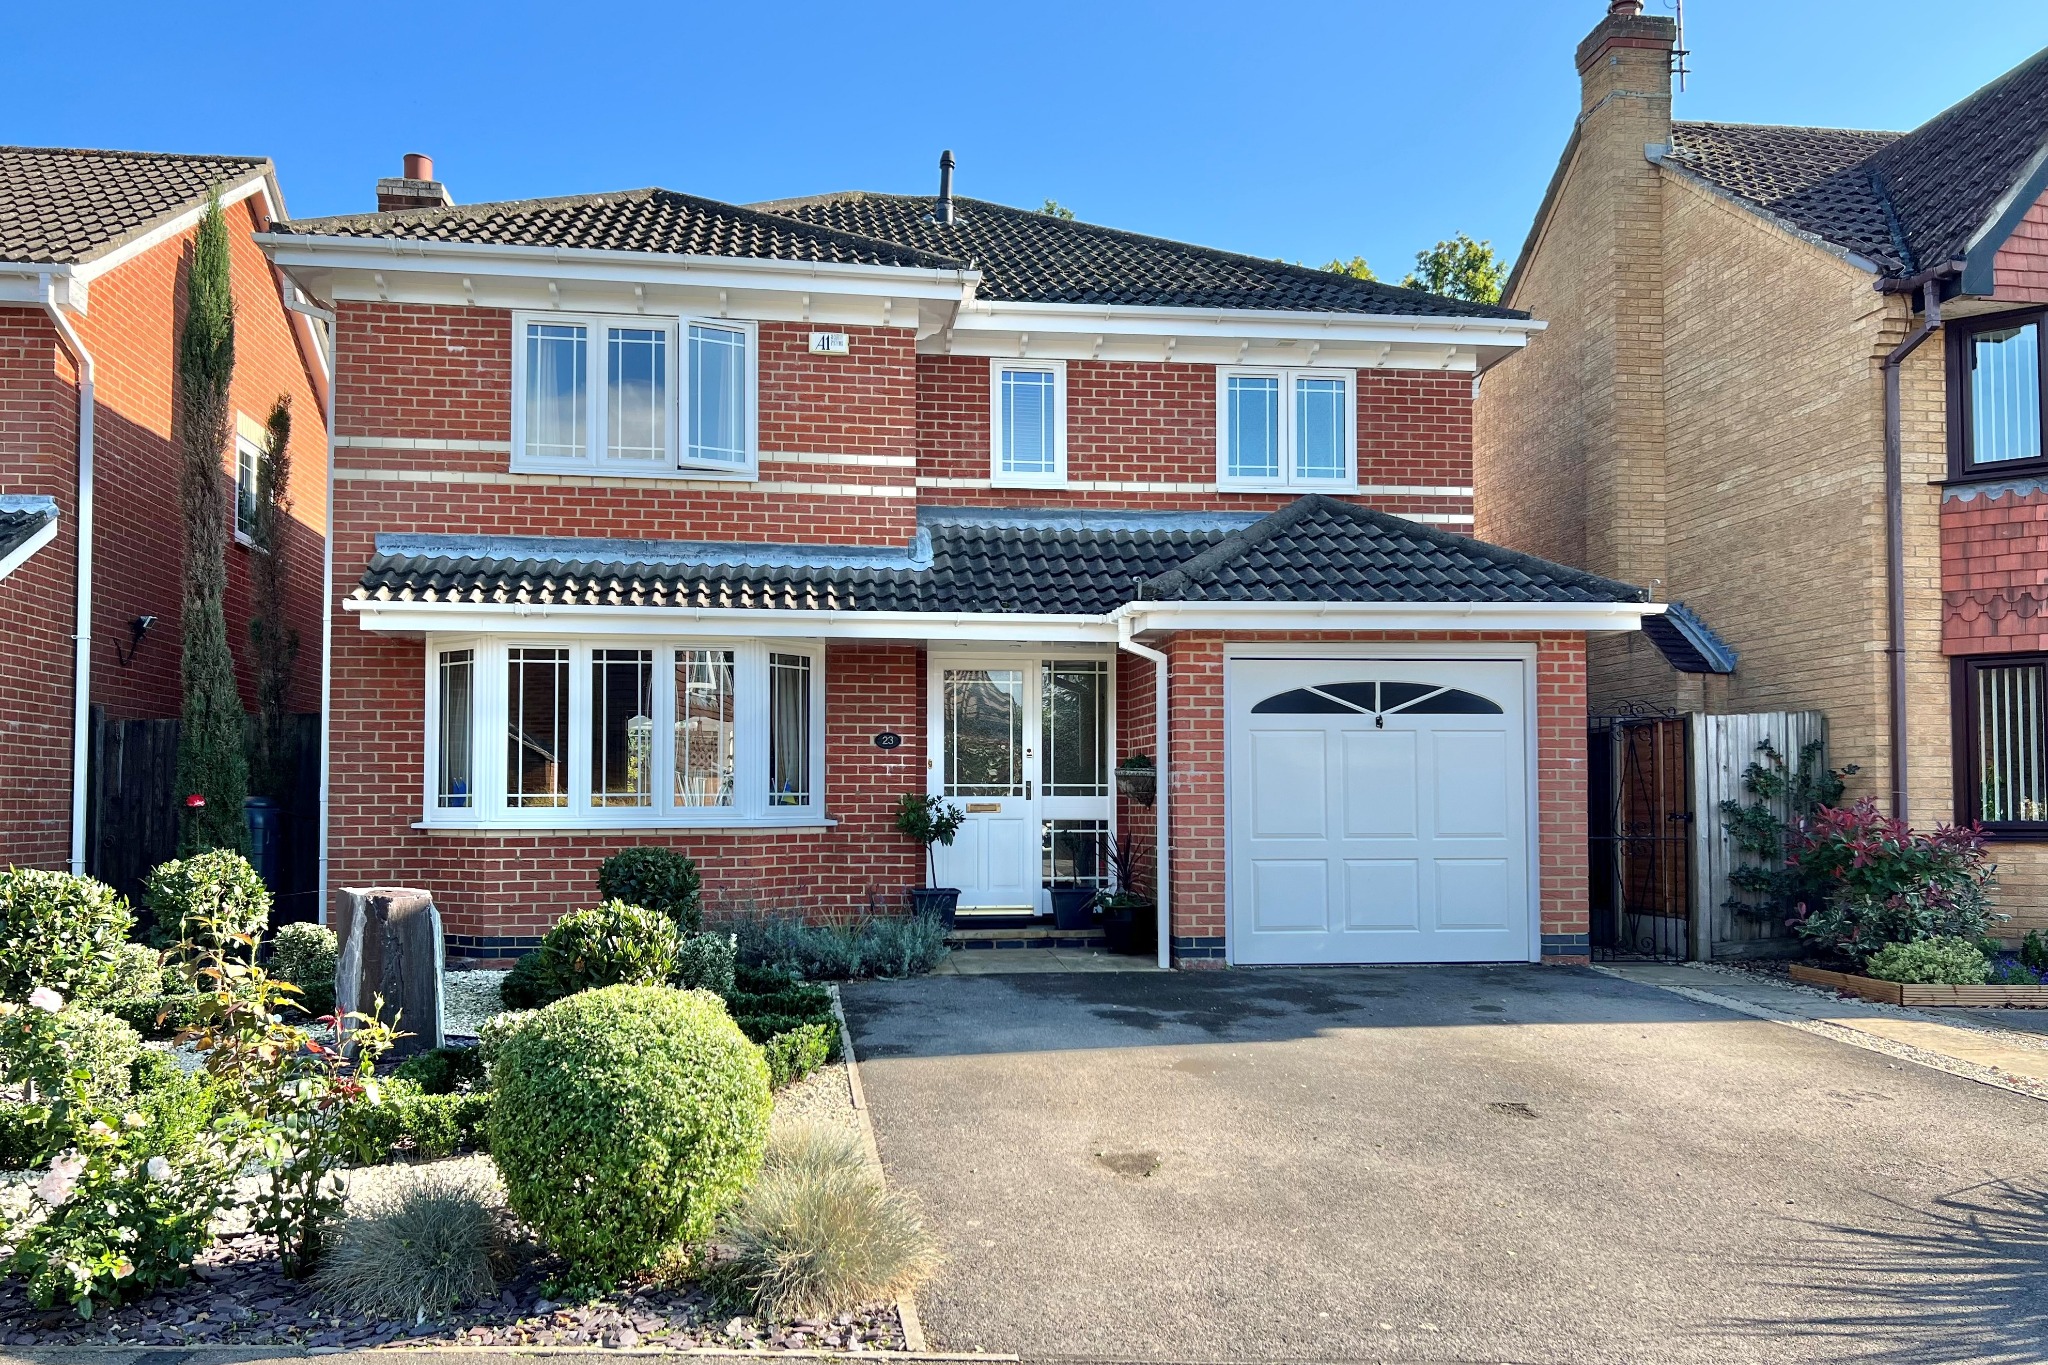 4 bed detached house for sale in Titchfield Common, Fareham - Property Image 1